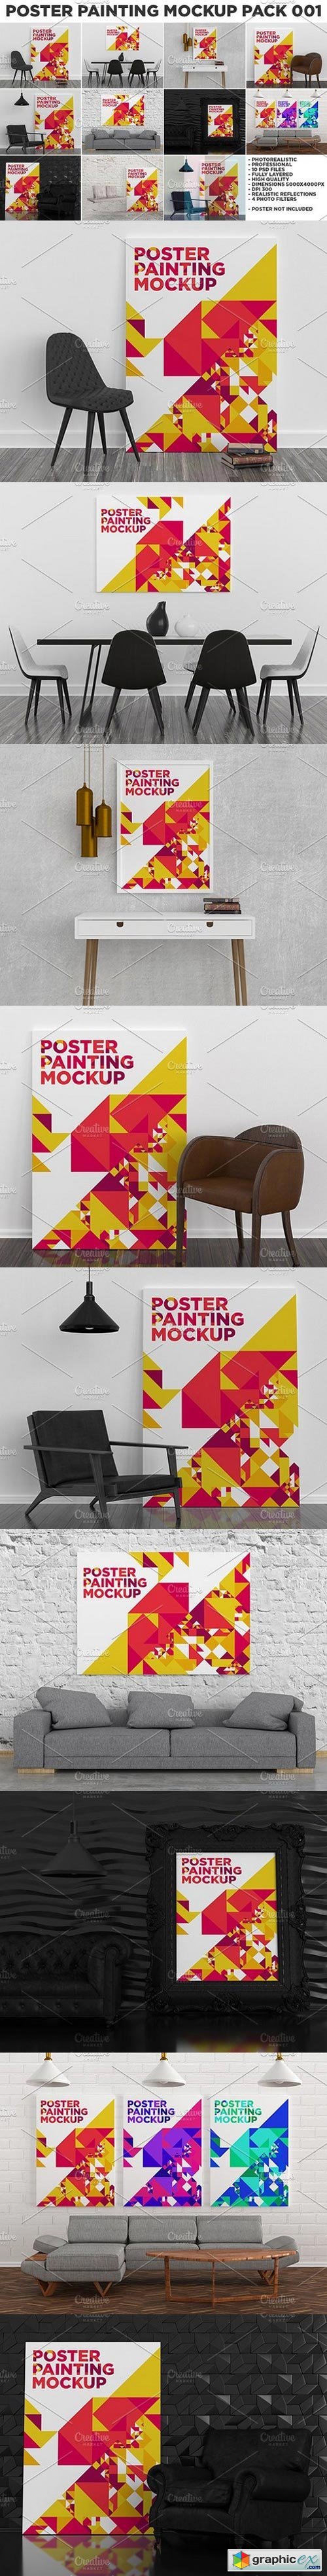 Poster Painting MockUp Pack 001